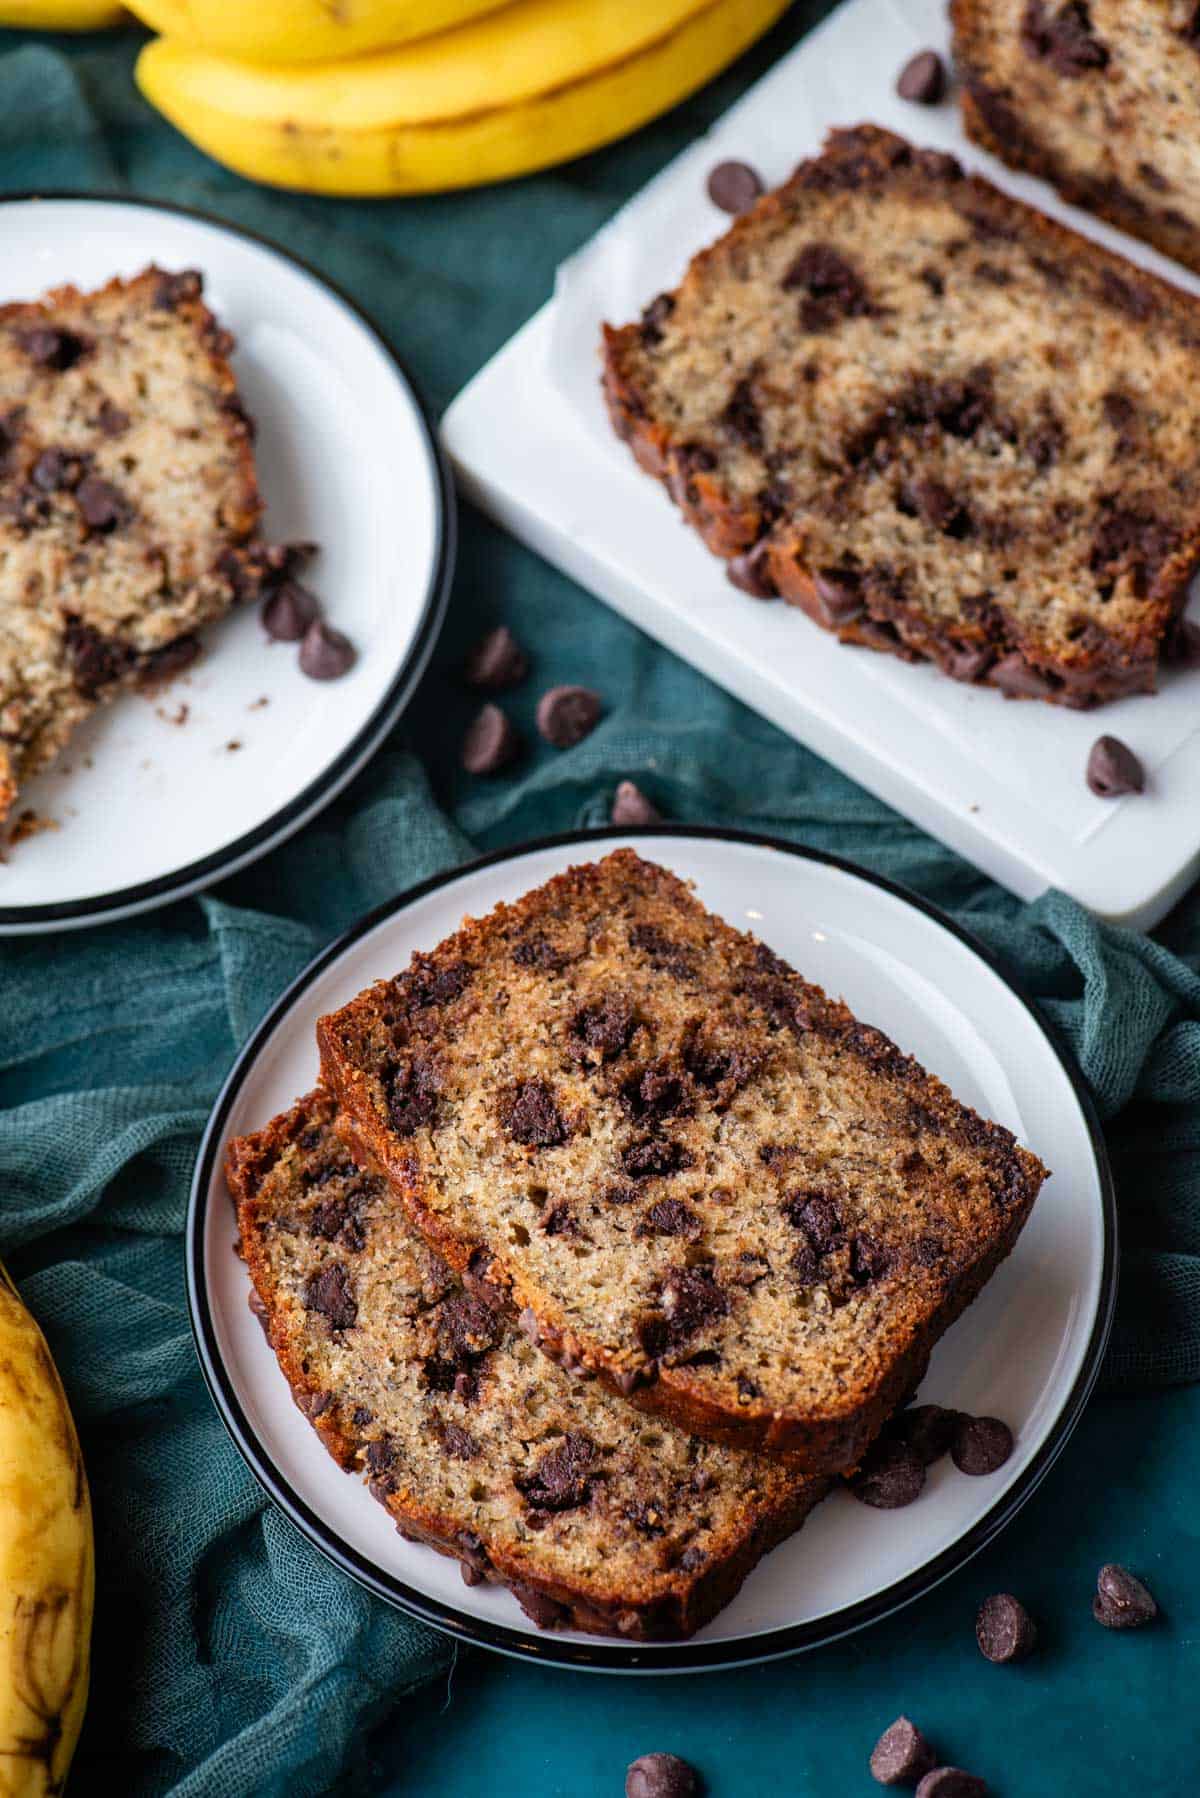 two small white plates with banana bread slices on them, the front one with two slices on it, and a white cutting board with banana bread slices on it, all sitting on a dark teal towel with chocolate chips scattered around